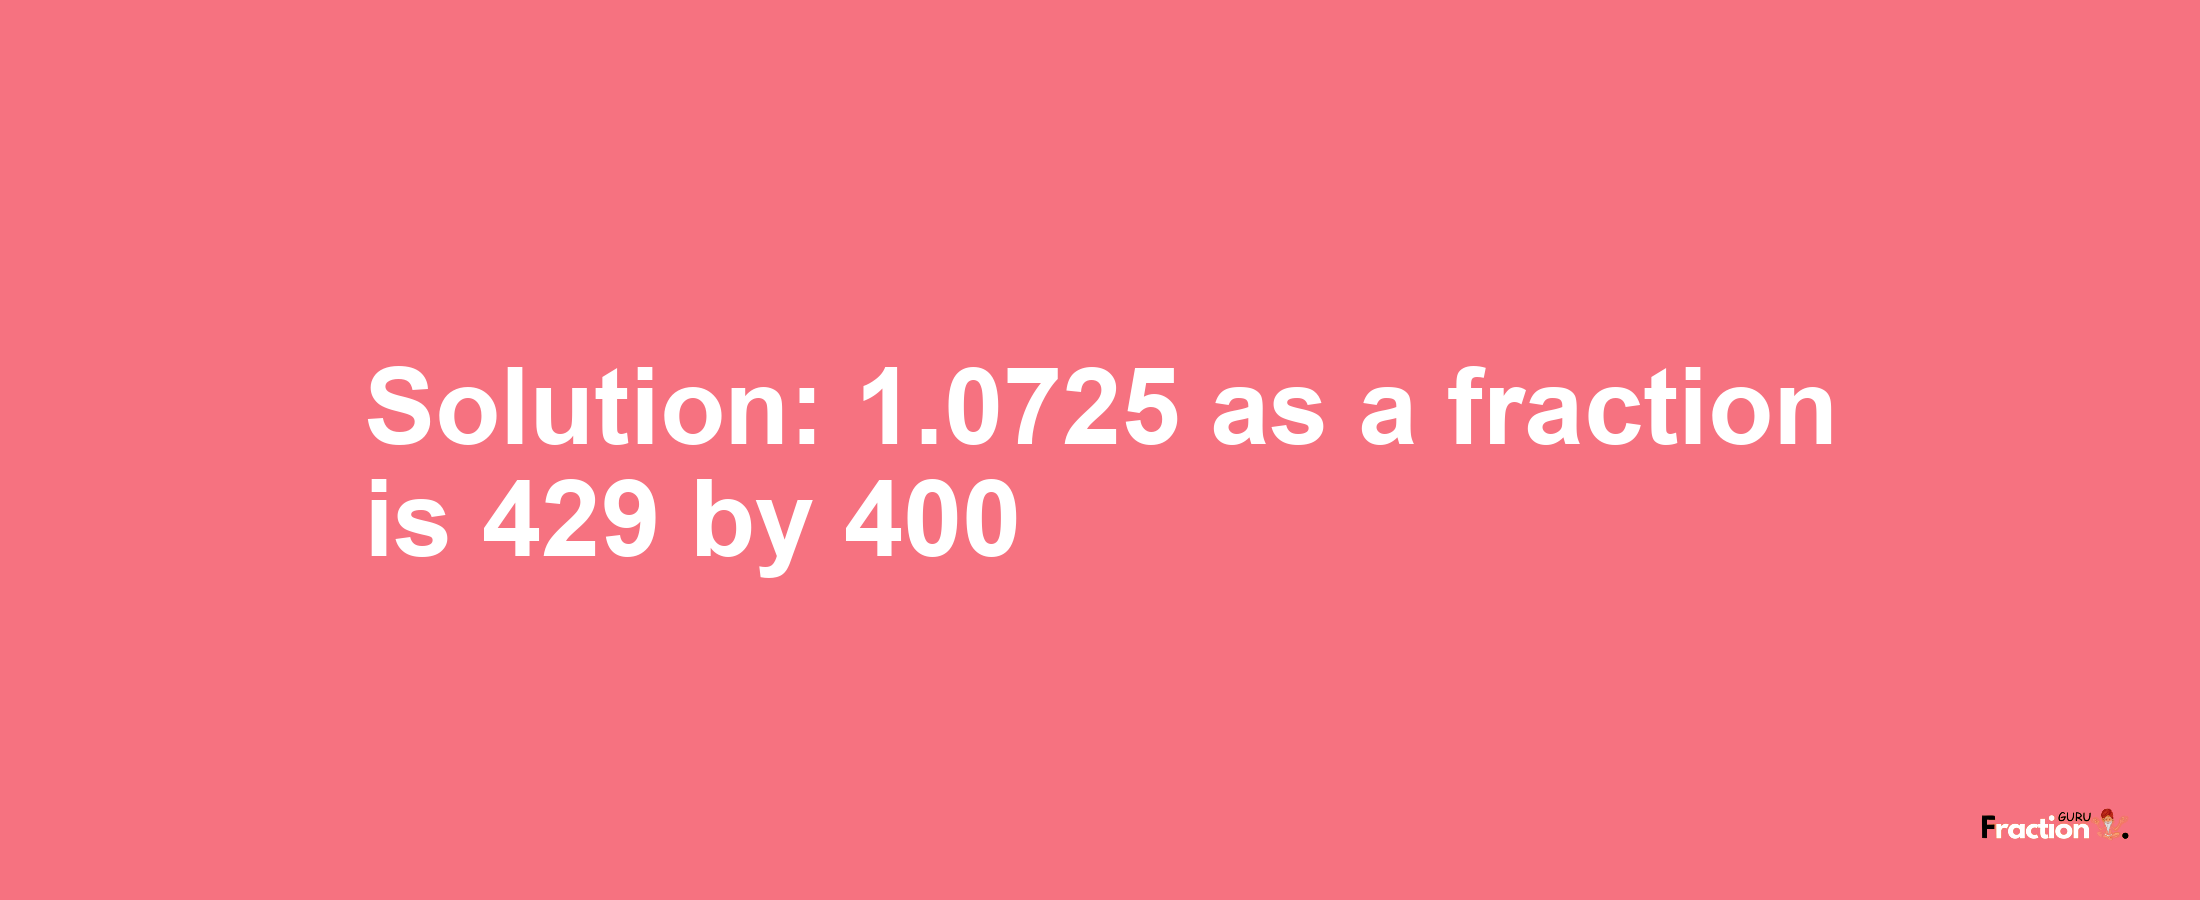 Solution:1.0725 as a fraction is 429/400